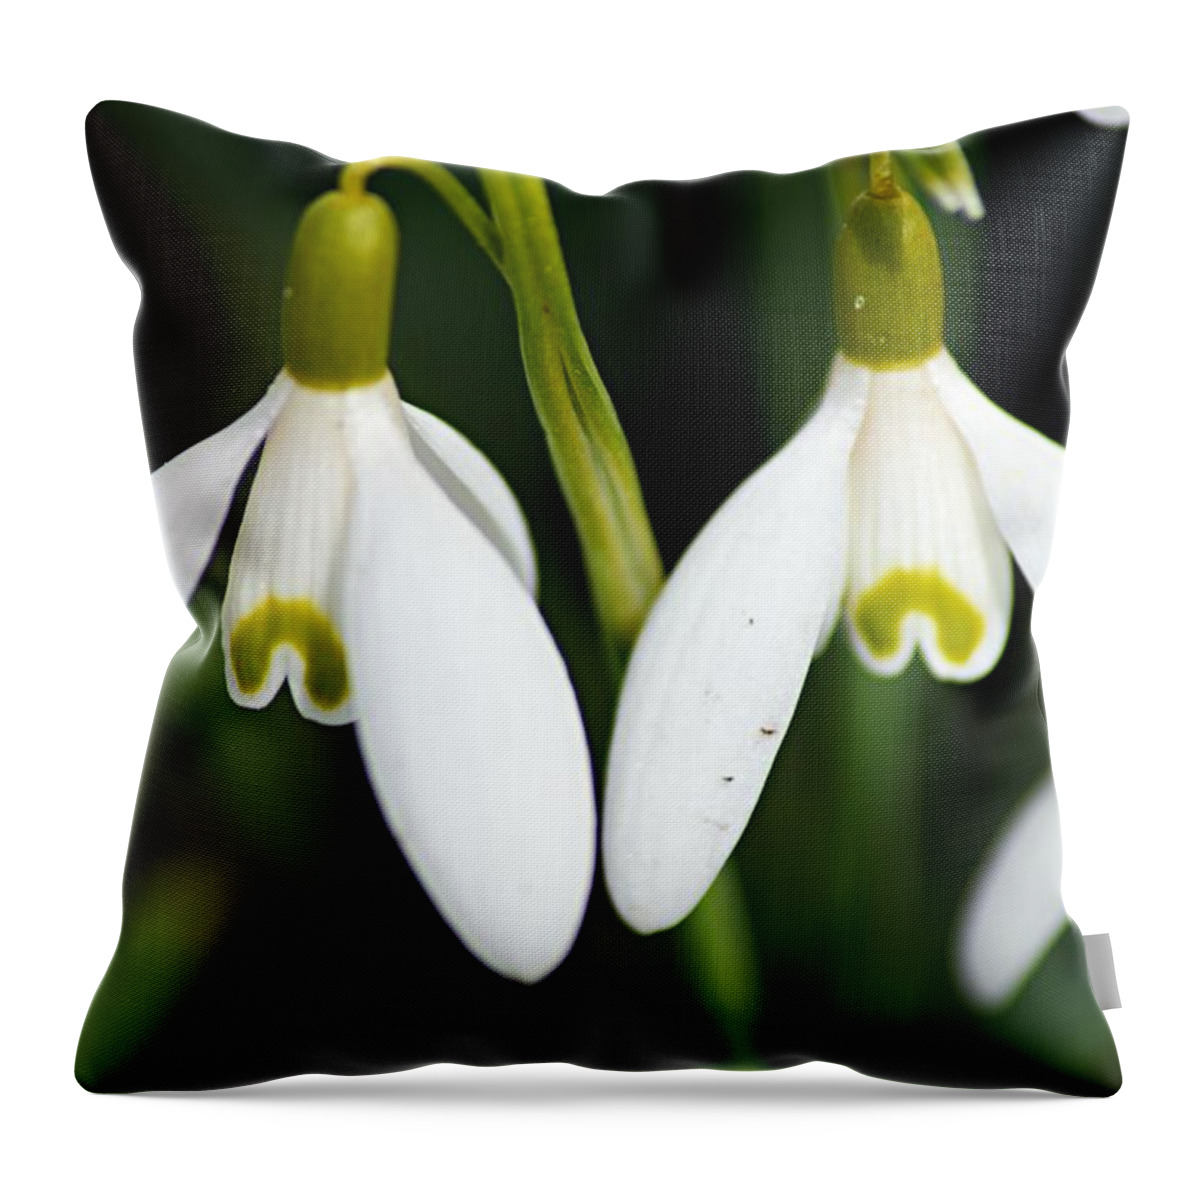 Snowdrops Throw Pillow featuring the photograph Snowdrops by Larry Ricker